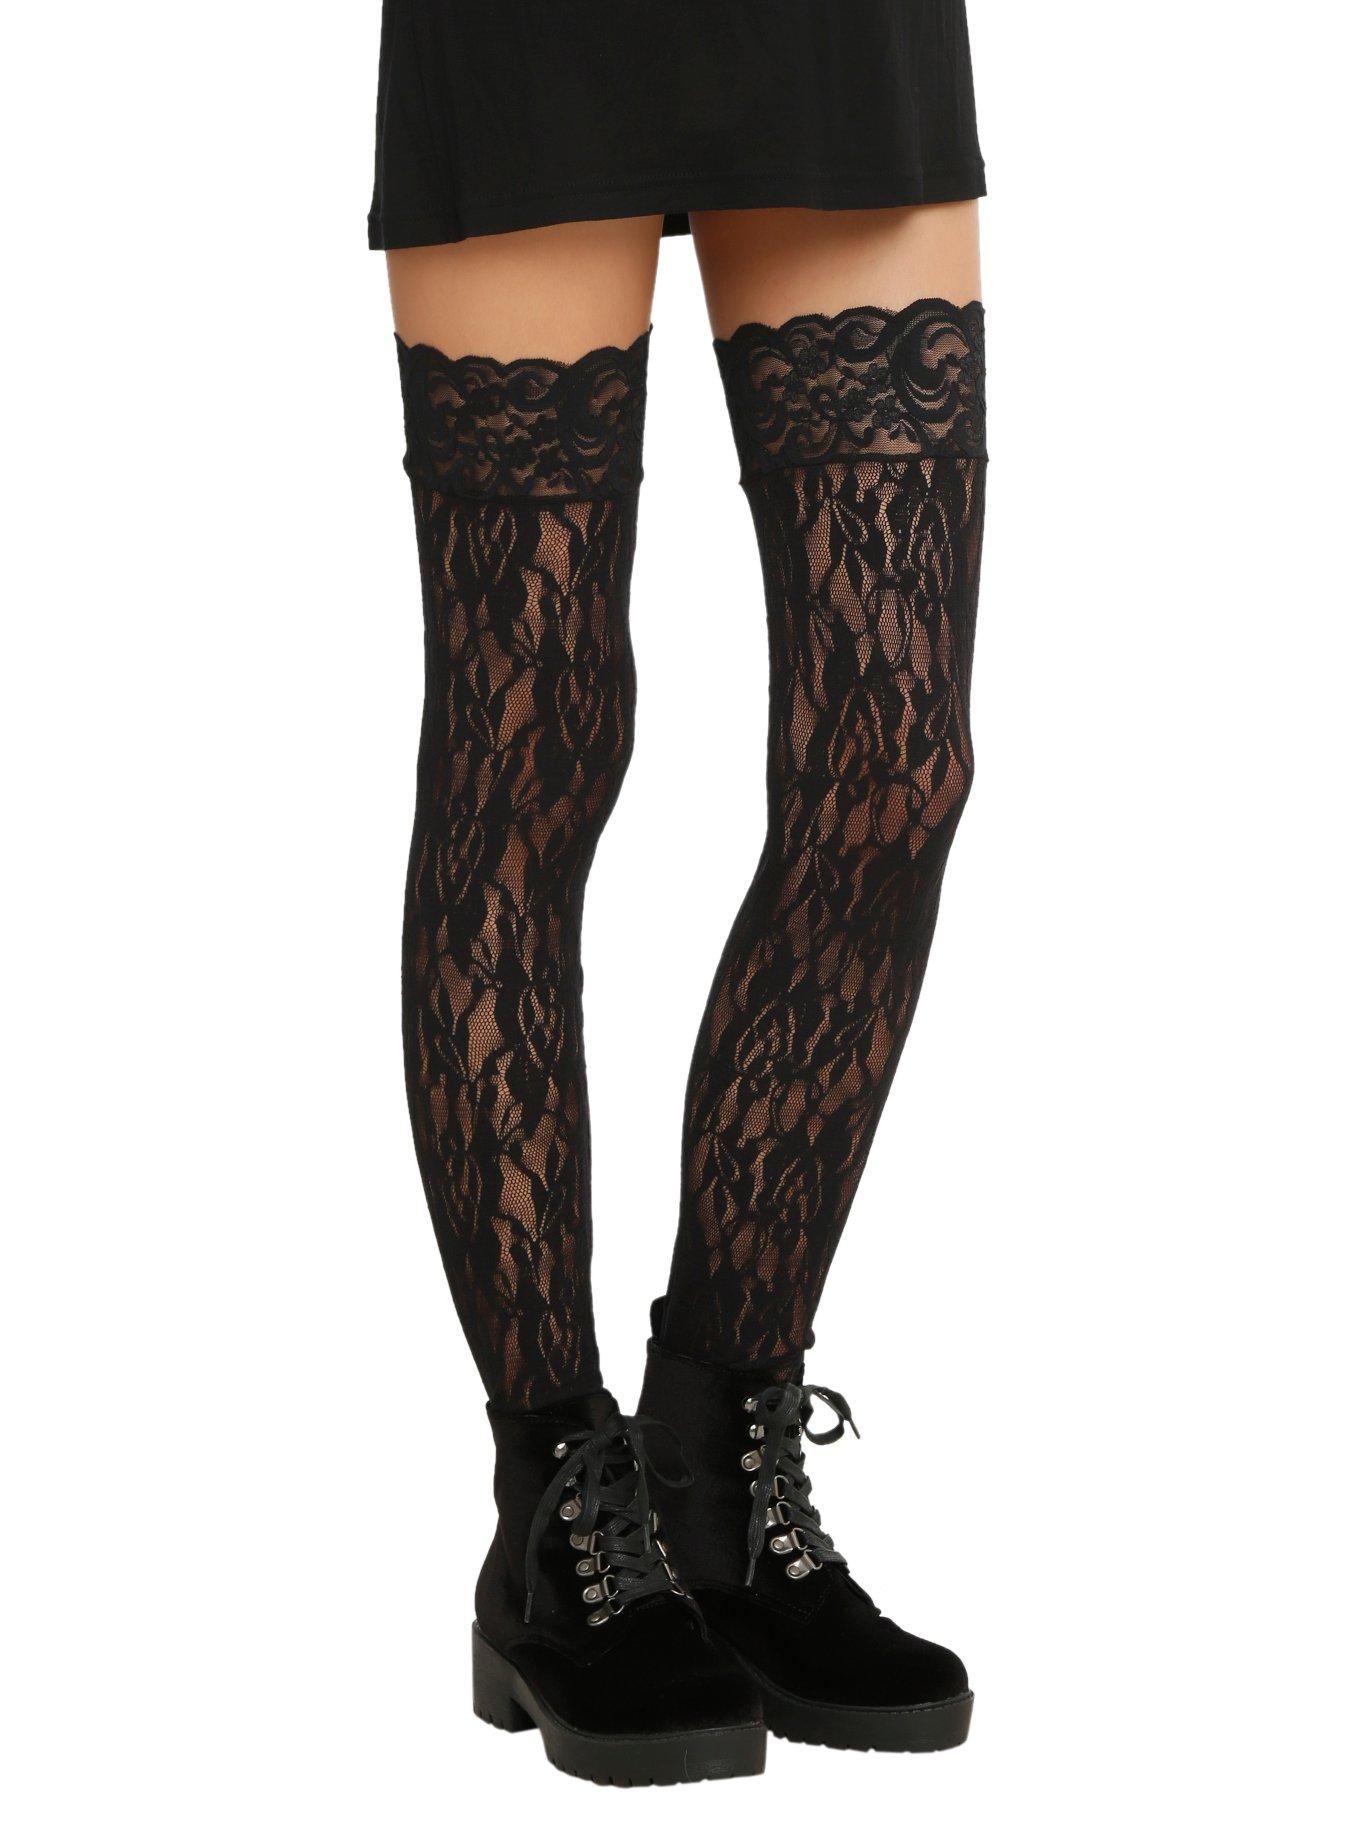 Black Lace On Lace Thigh Highs, BLACK, hi-res